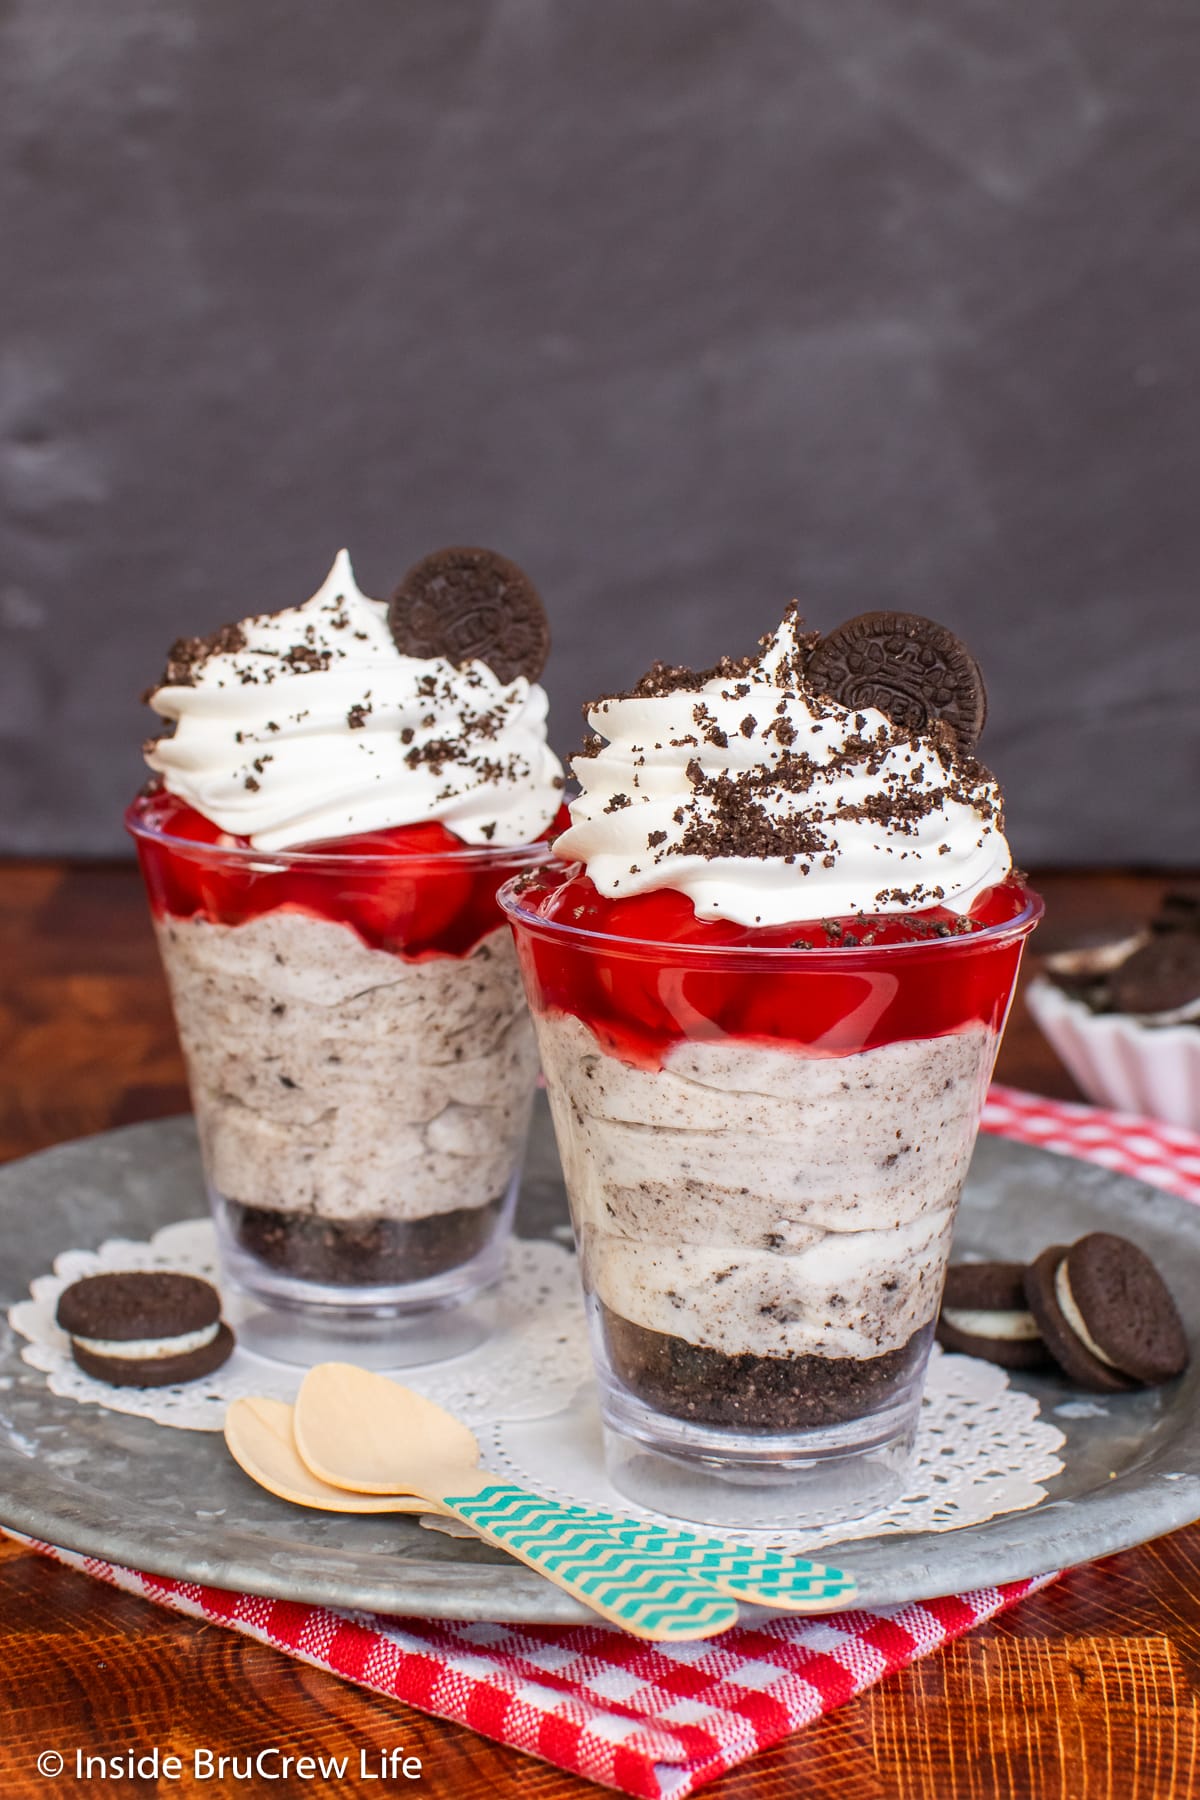 Two small cherry cheesecake parfaits on a tray.